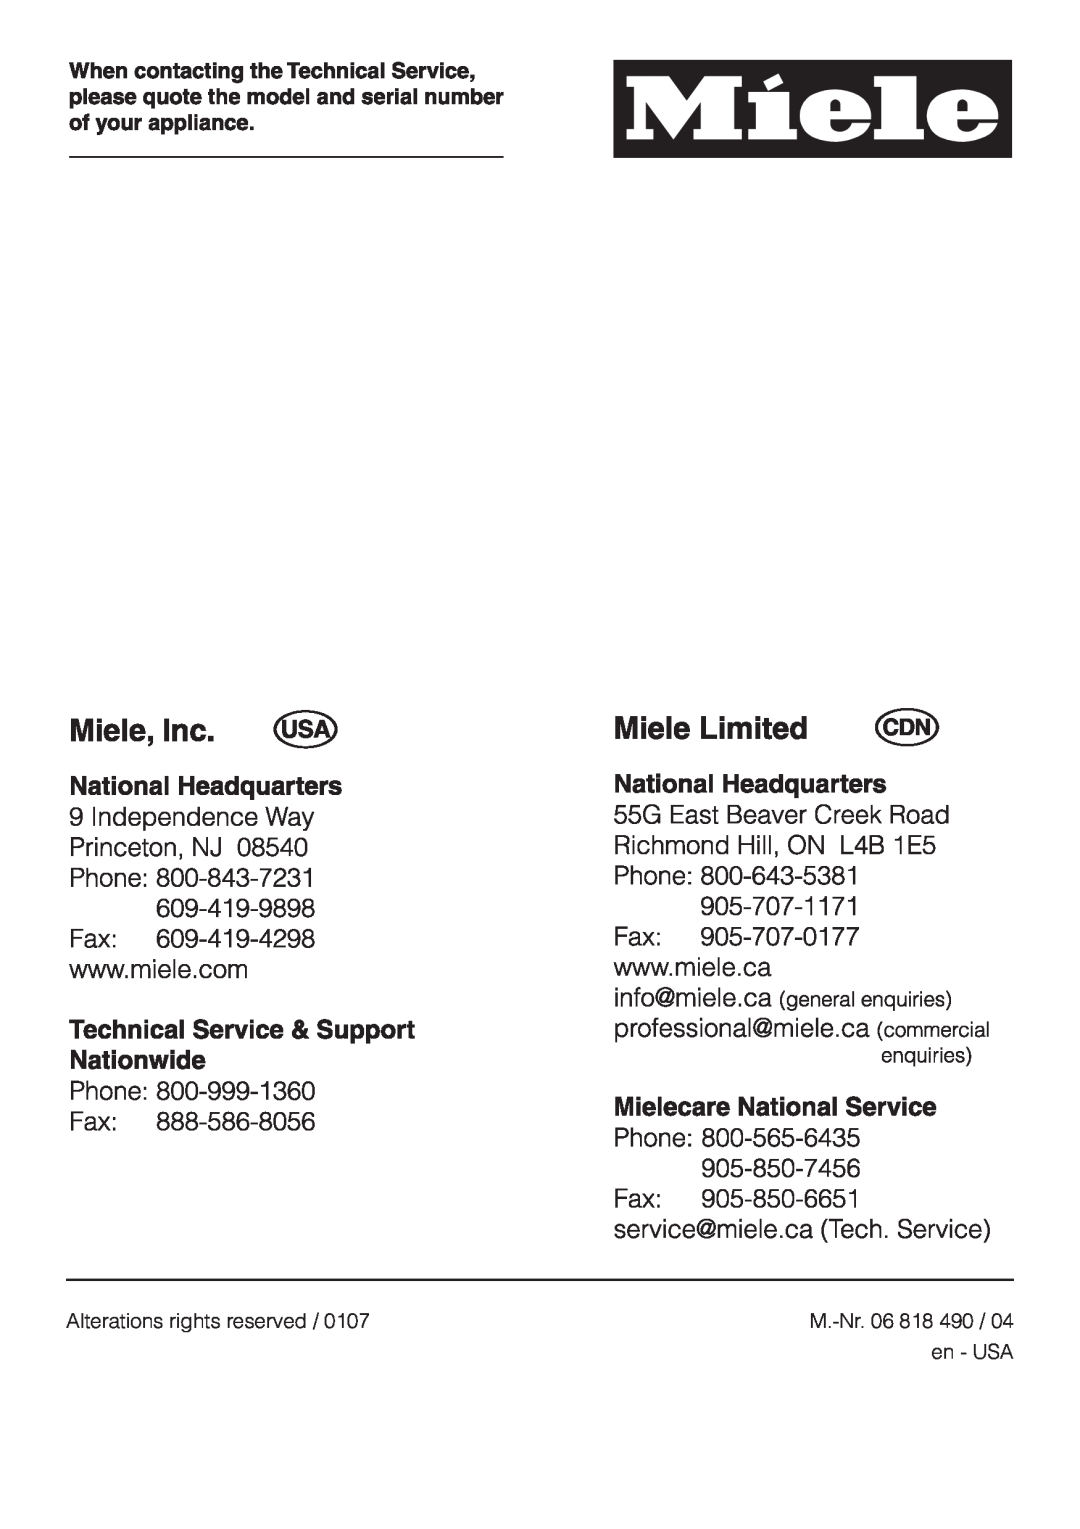 Miele KM 3465, KM 3475, KM 3464 installation instructions Alterations rights reserved, en - USA, M.-Nr.06 